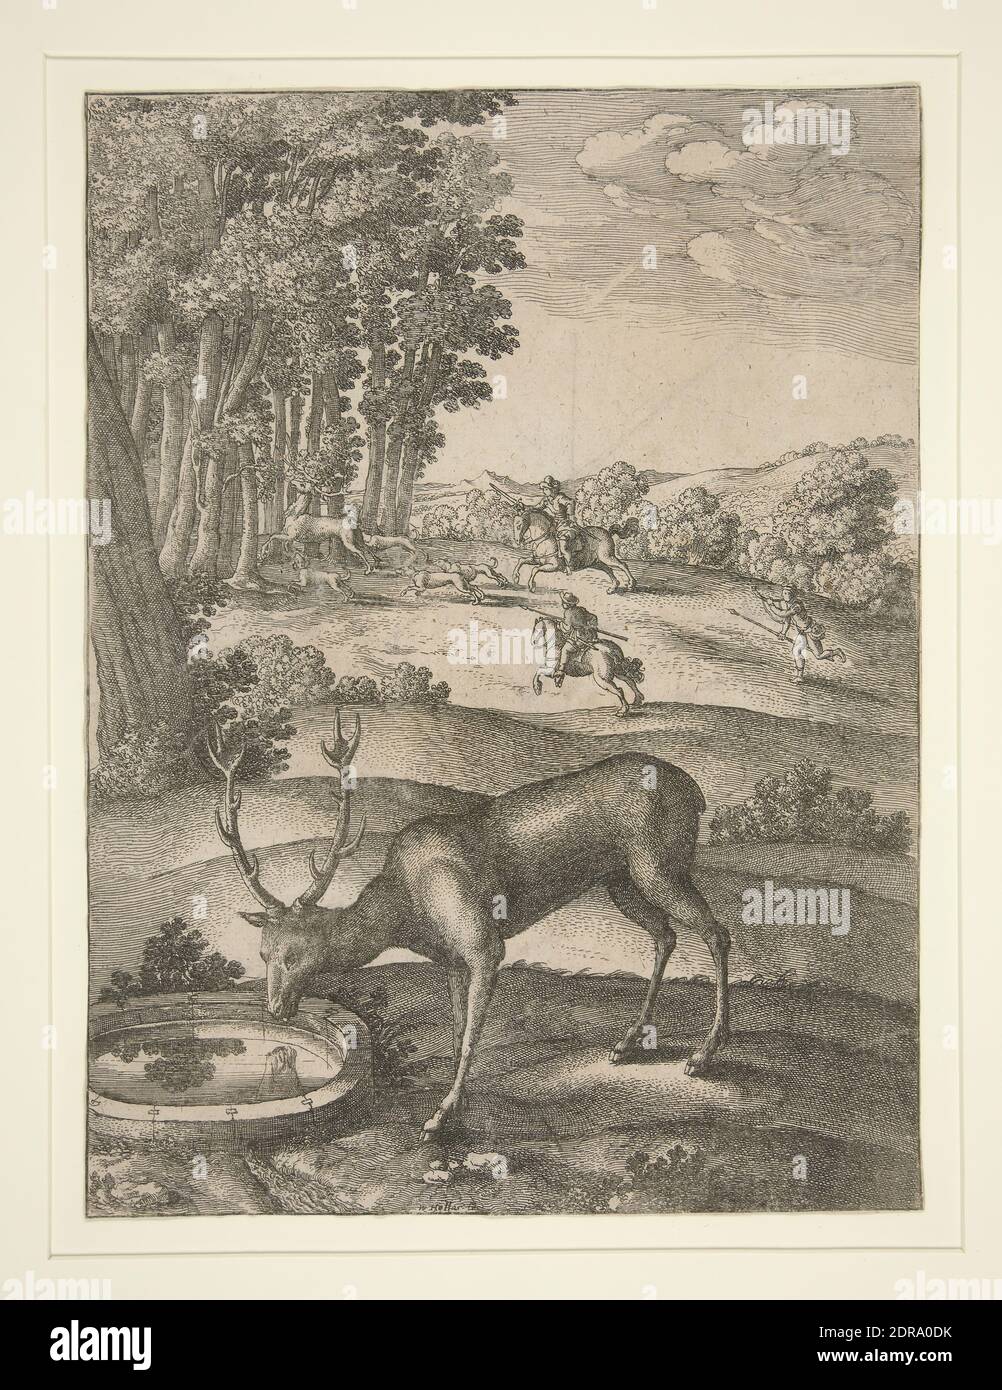 Artist: Wenceslaus Hollar, Bohemian, 1607–1677, Der Hirsch (The Stag), from the series Kleinere Kupfer zum Aesop (Small Copperplates for Aesop), Etching, sheet: 25.5 × 17.3 cm (10 1/16 × 6 13/16 in.), Made in Bohemia, Czech Republic, Bohemian, 17th century, Works on Paper - Prints Stock Photo